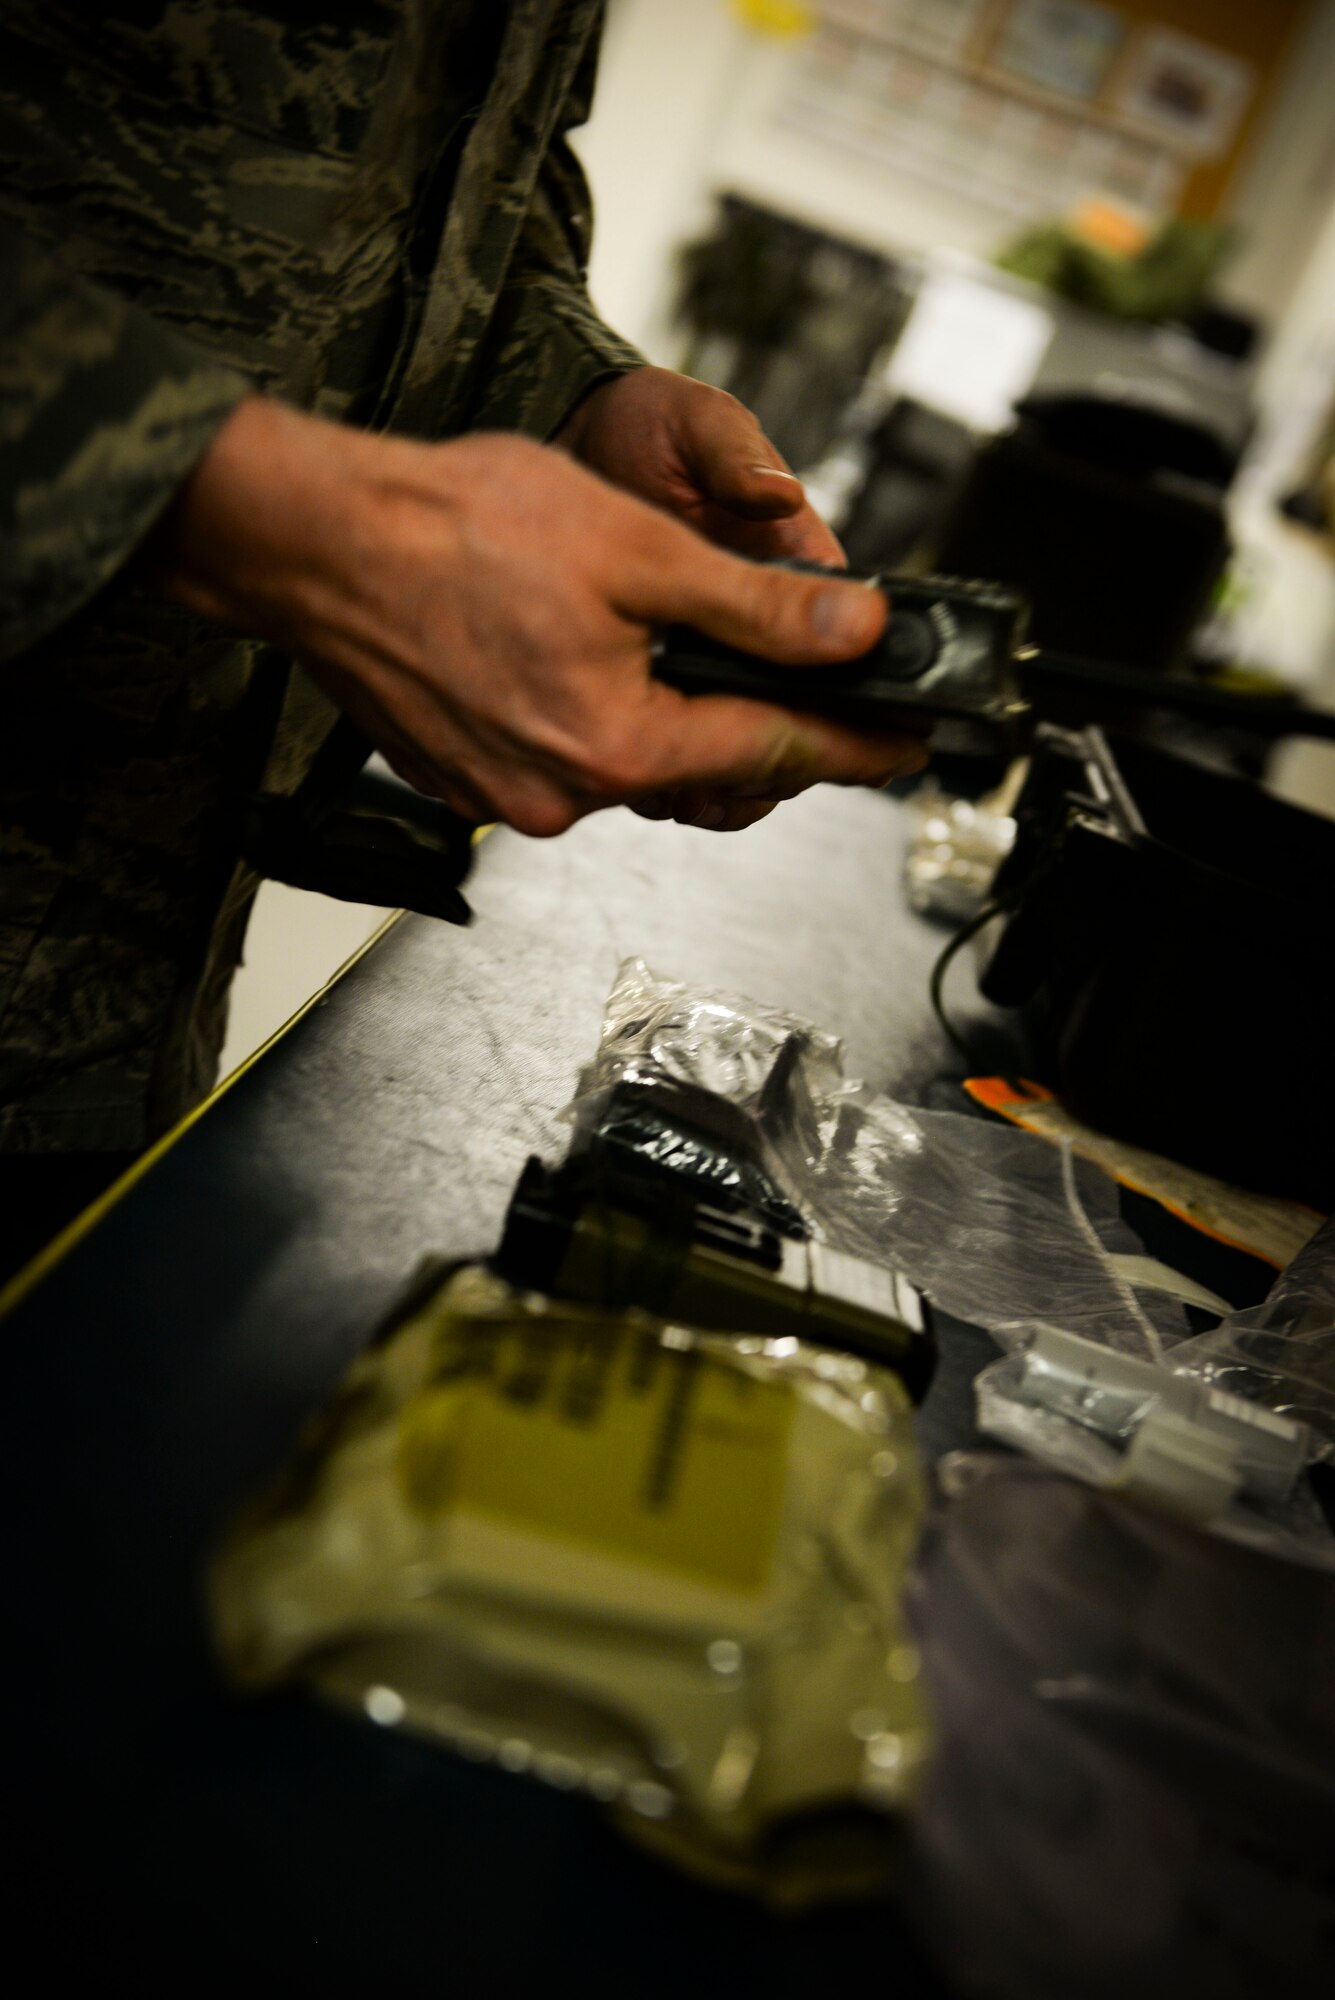 A U.S. Airman from the 100th Operations Support Squadron aircrew flight equipment shop inspects the emergency kit box for the KC-135 Stratotanker making sure all certifications are up to date at RAF Mildenhall, England, April 24, 2018. The AFE shop has a variety of equipment to keep track of, from rubber rafts to life preservers. (U.S. Air Force photo by Airman 1st Class Alexandria Lee)